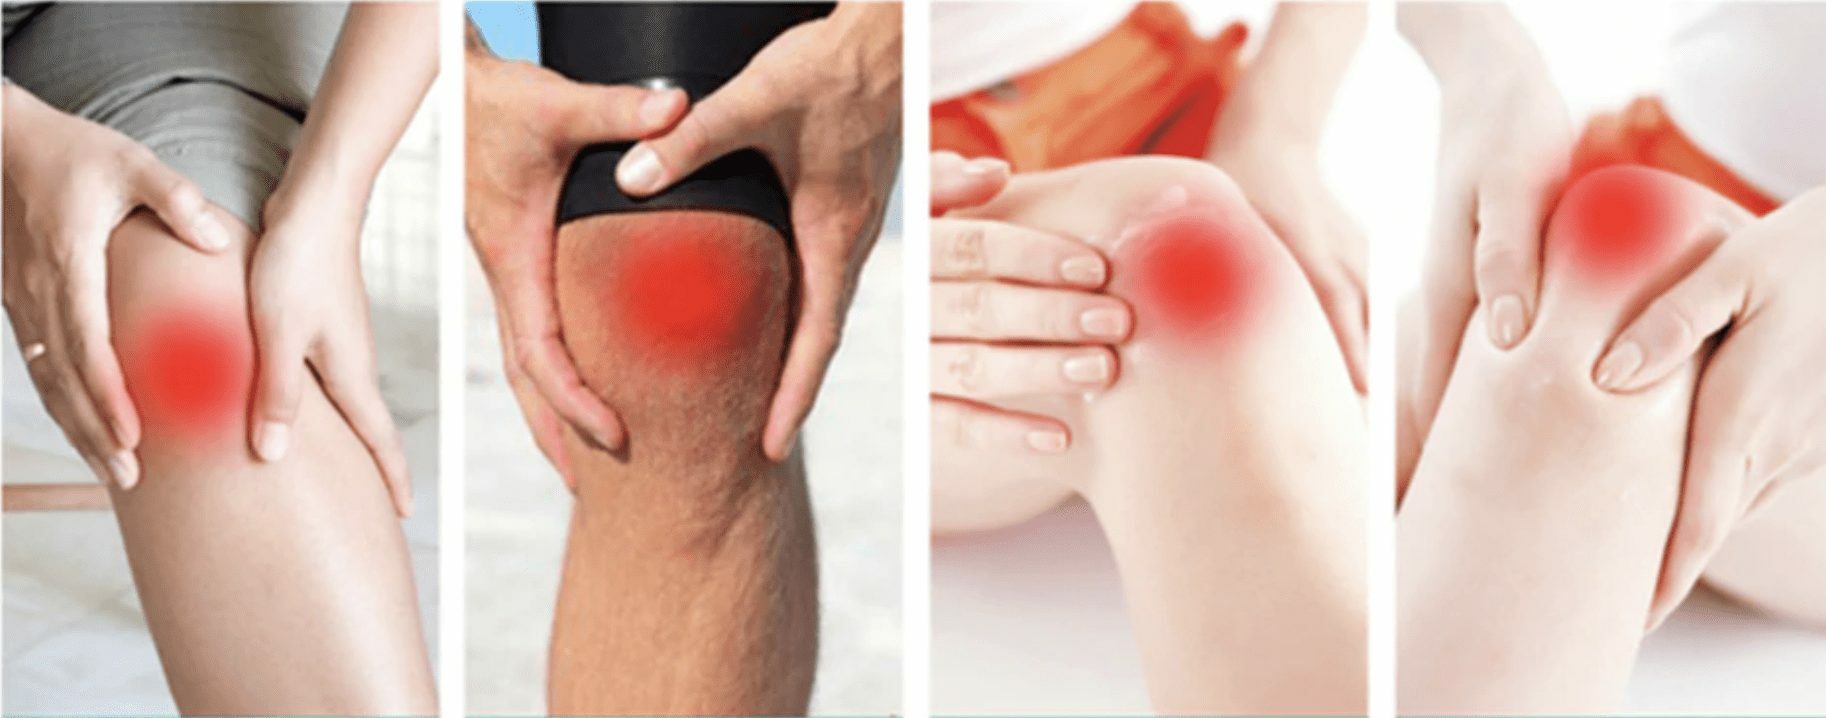 common causes of knee problems